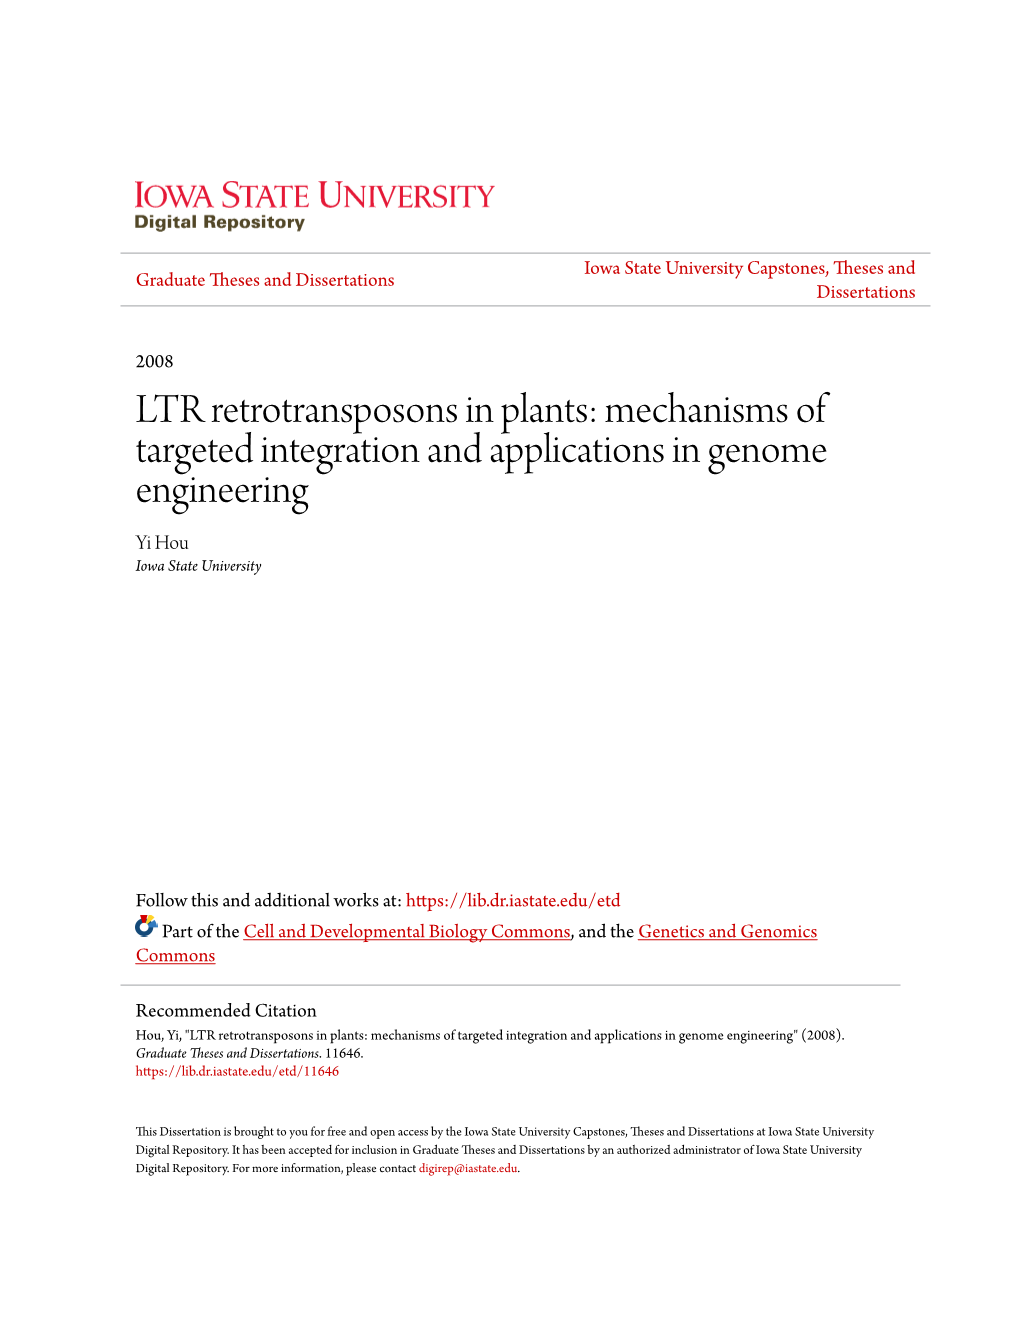 LTR Retrotransposons in Plants: Mechanisms of Targeted Integration and Applications in Genome Engineering Yi Hou Iowa State University